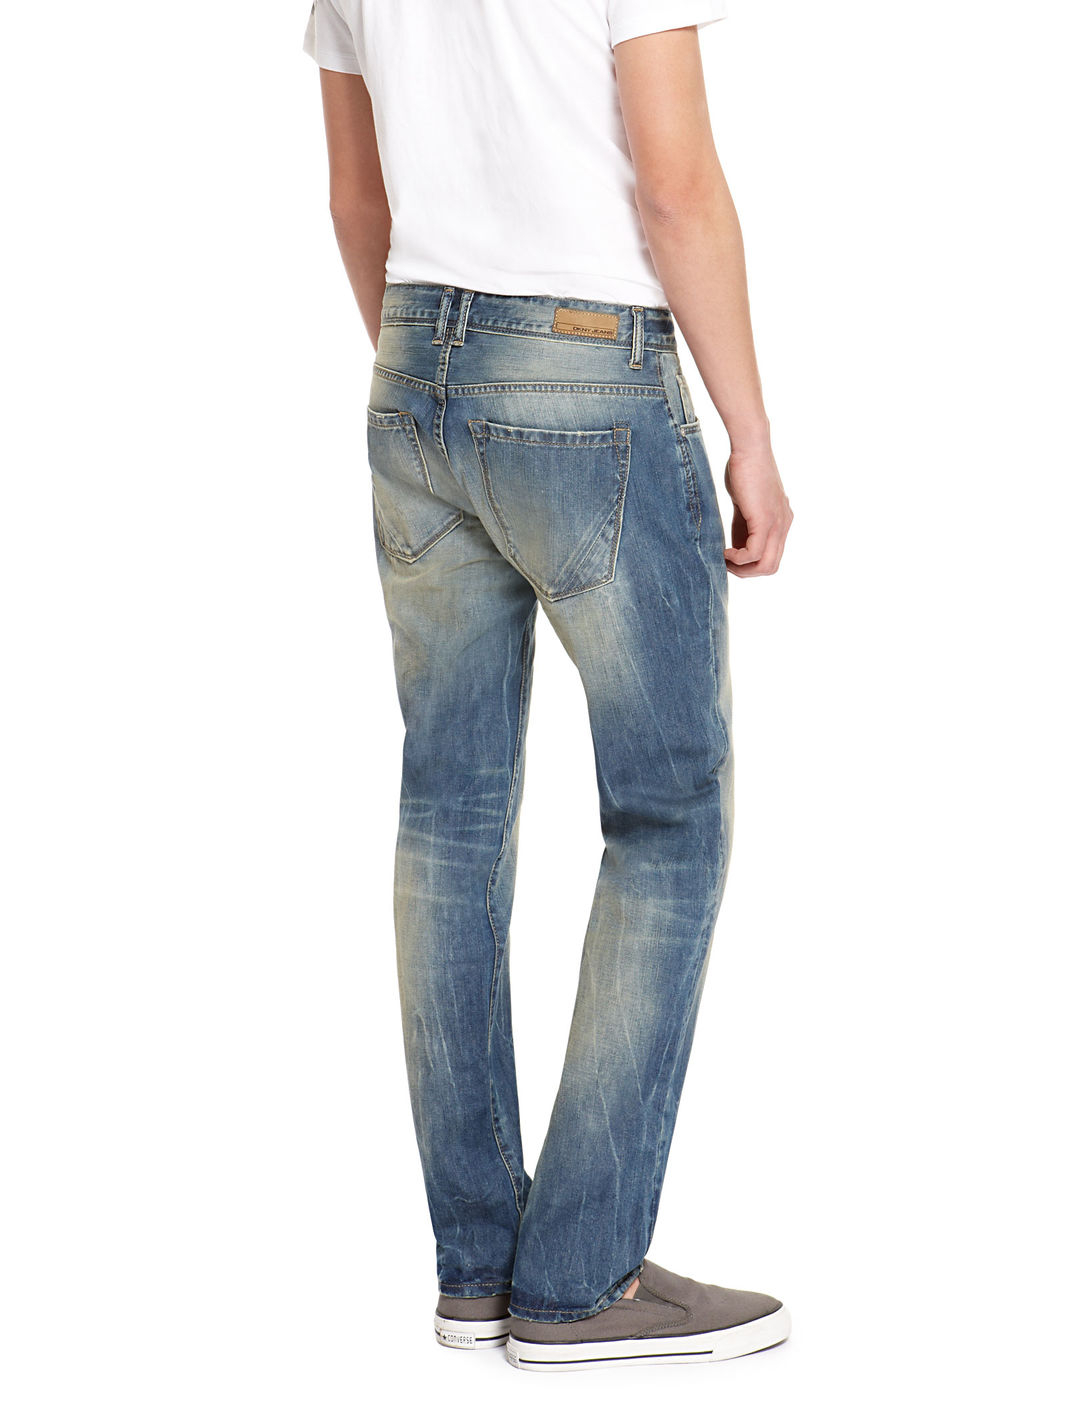 Lyst - Dkny Soho Relaxed-Fit Jeans in Blue for Men